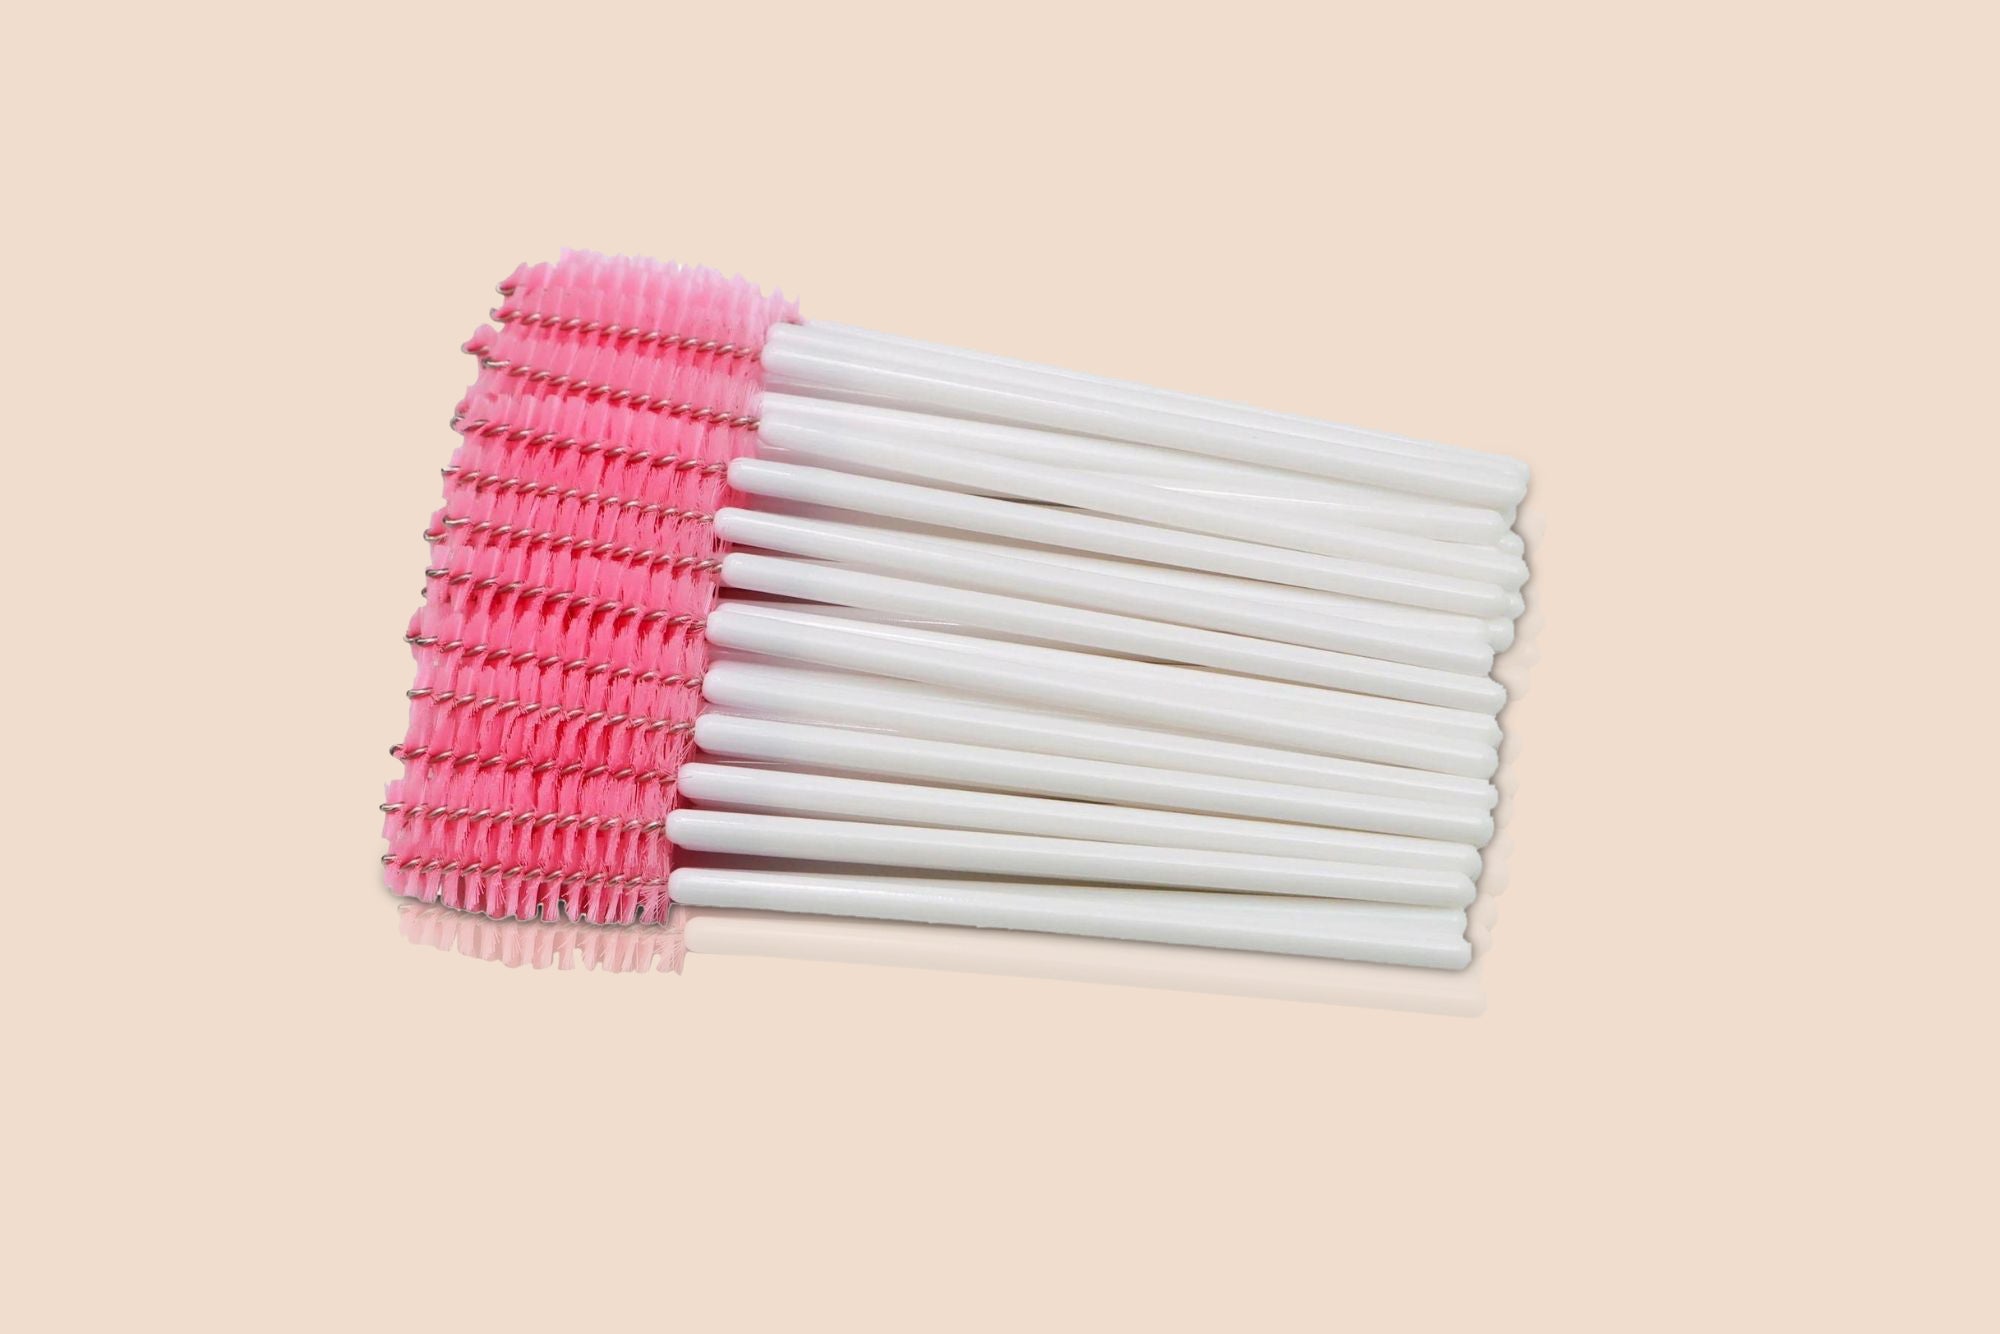 White & Pink Disposable Mascara Wands